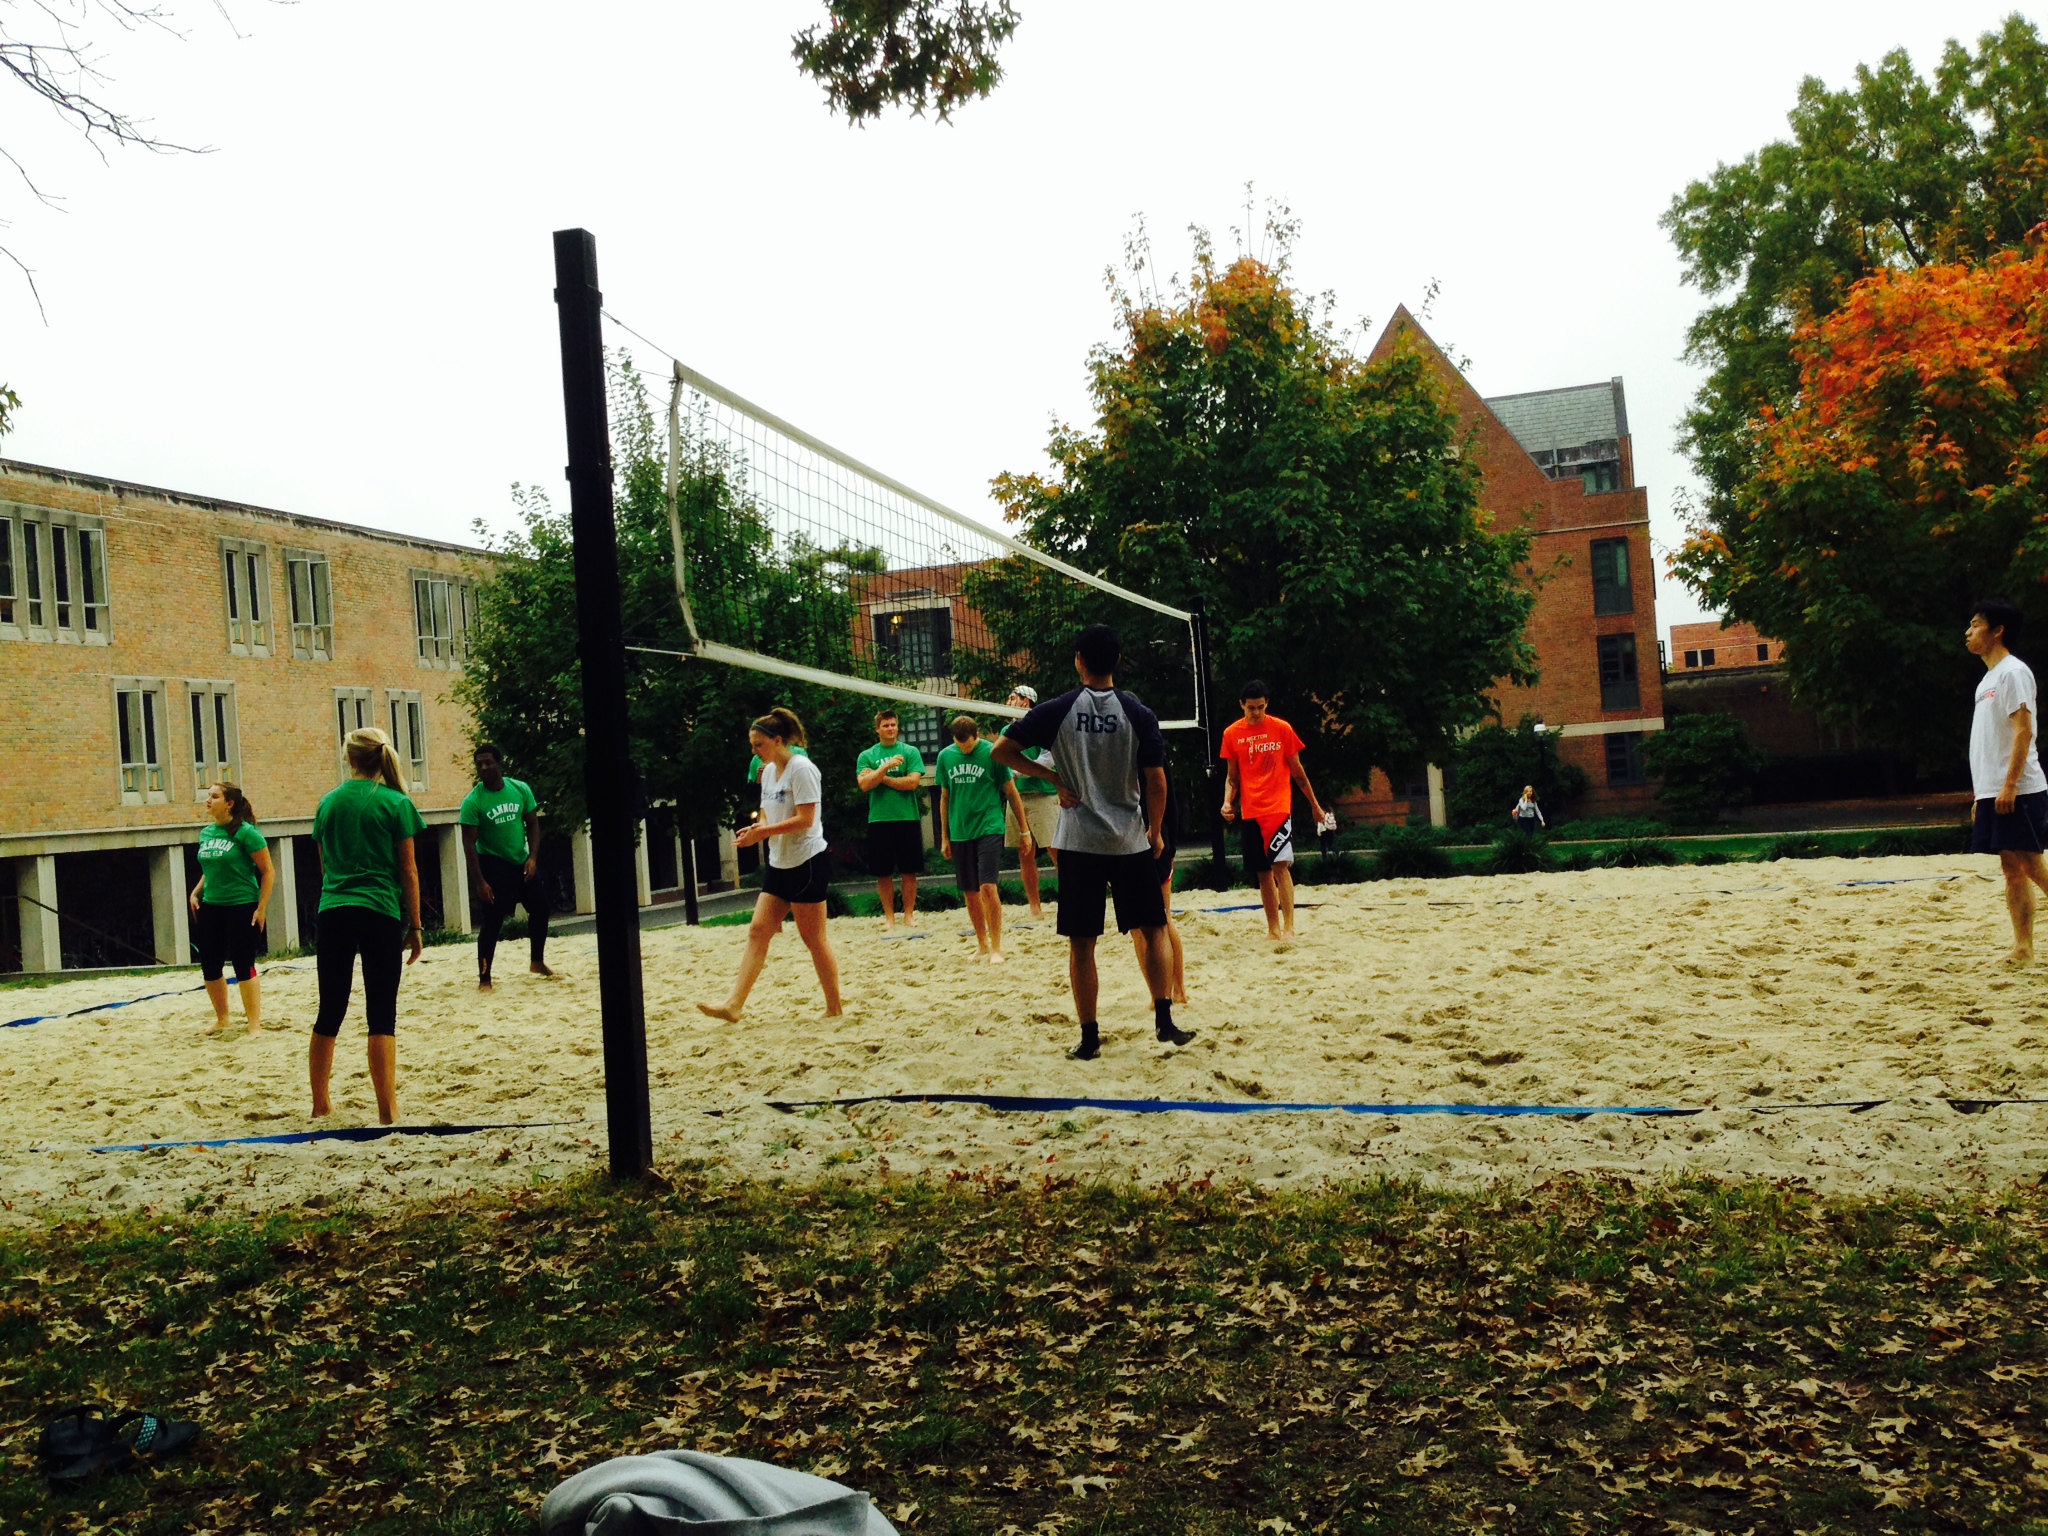 Sand volleyball game